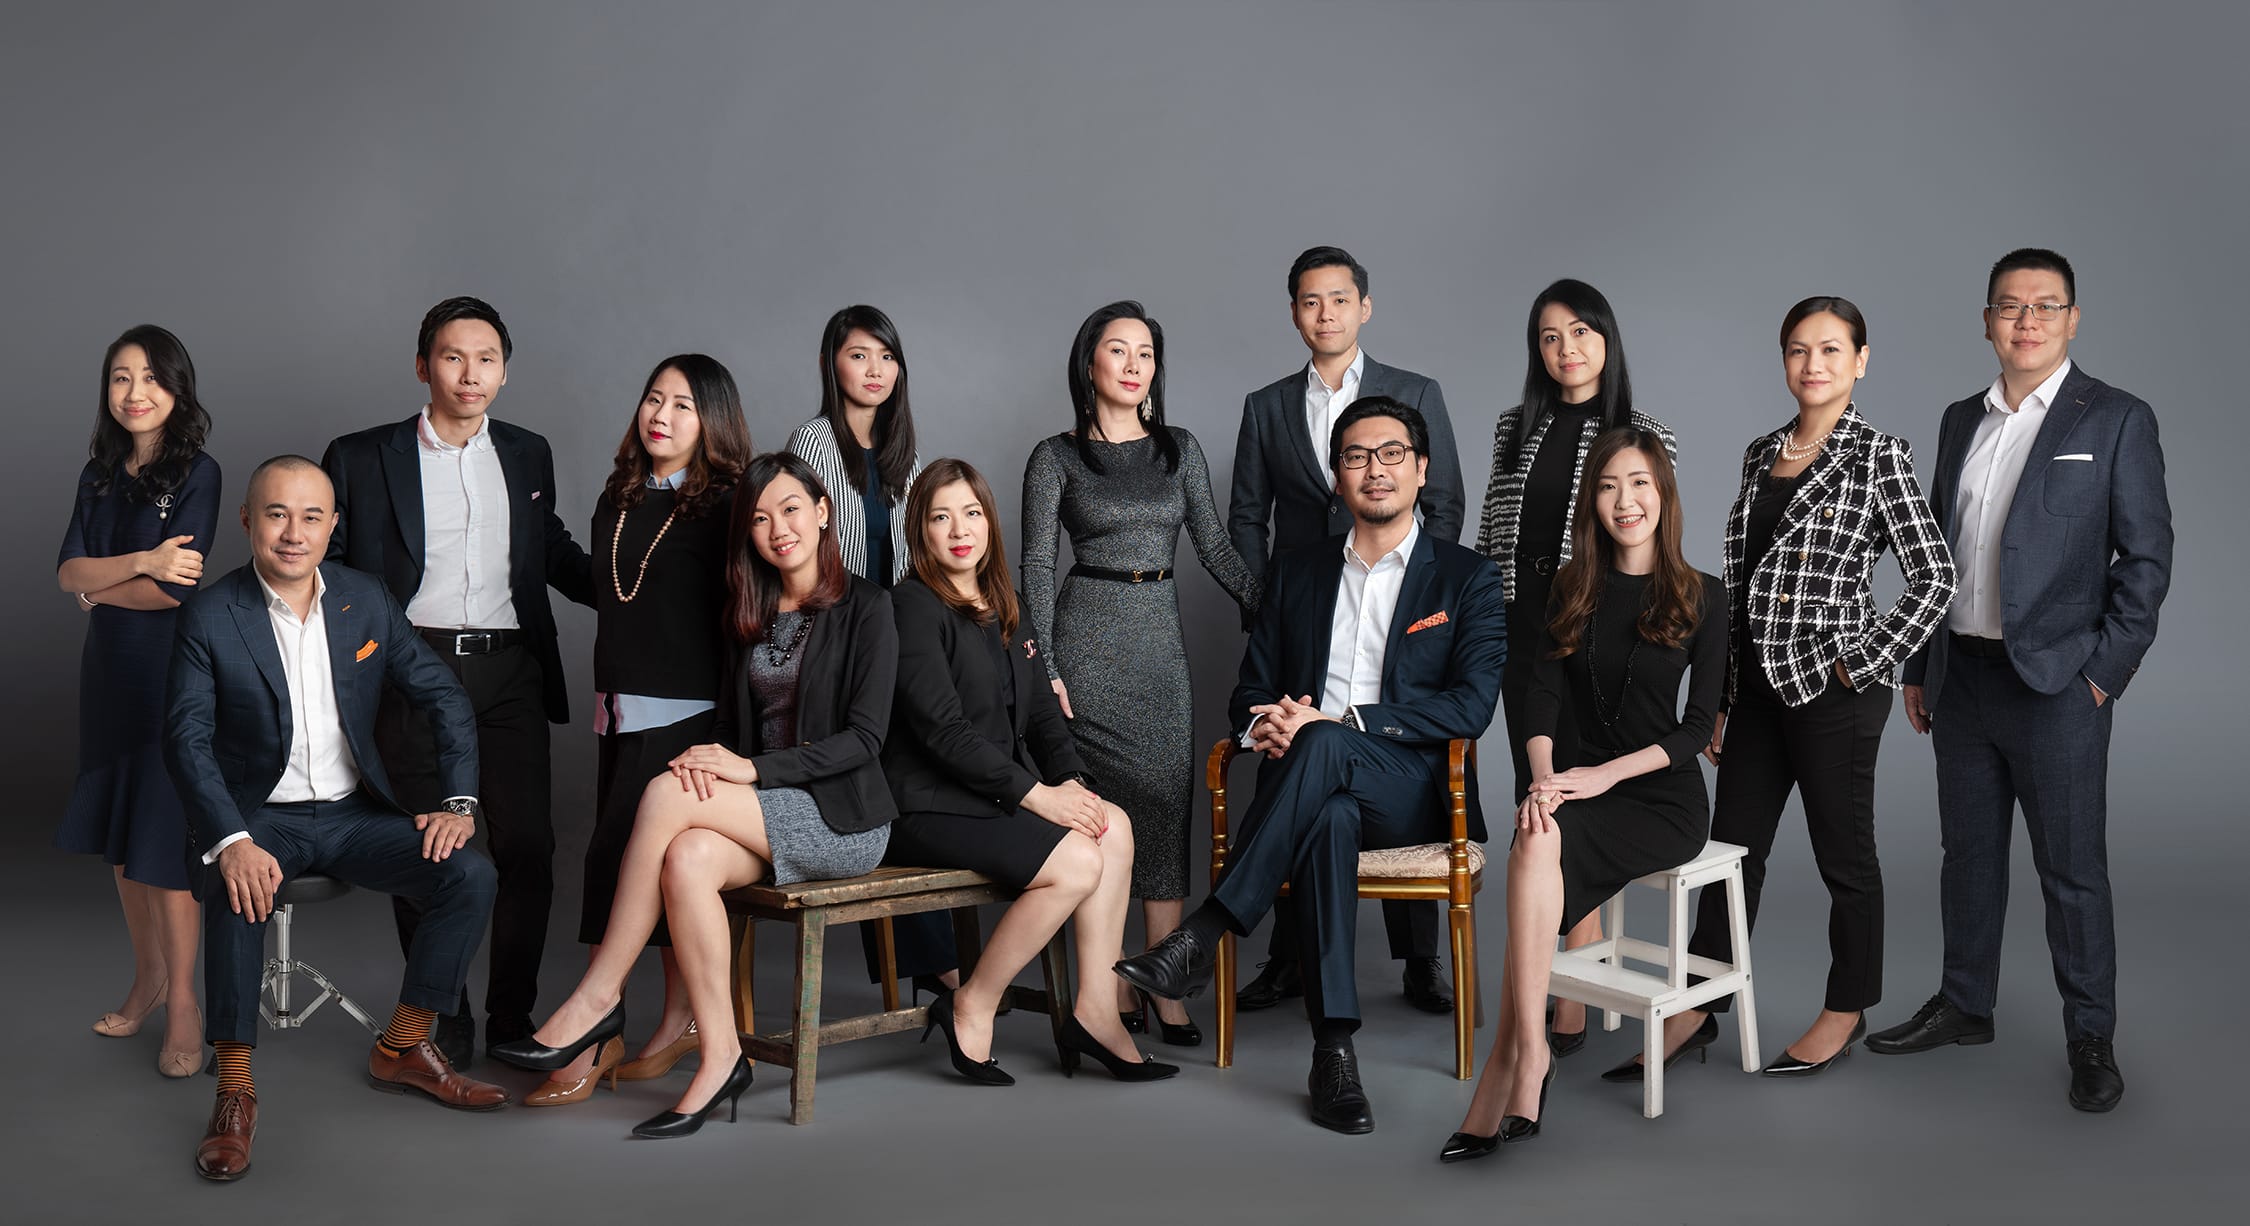 A group of male and female professionals posing for a corporate photoshoo in Singapore, White Room Studio Credit: White Room Studio